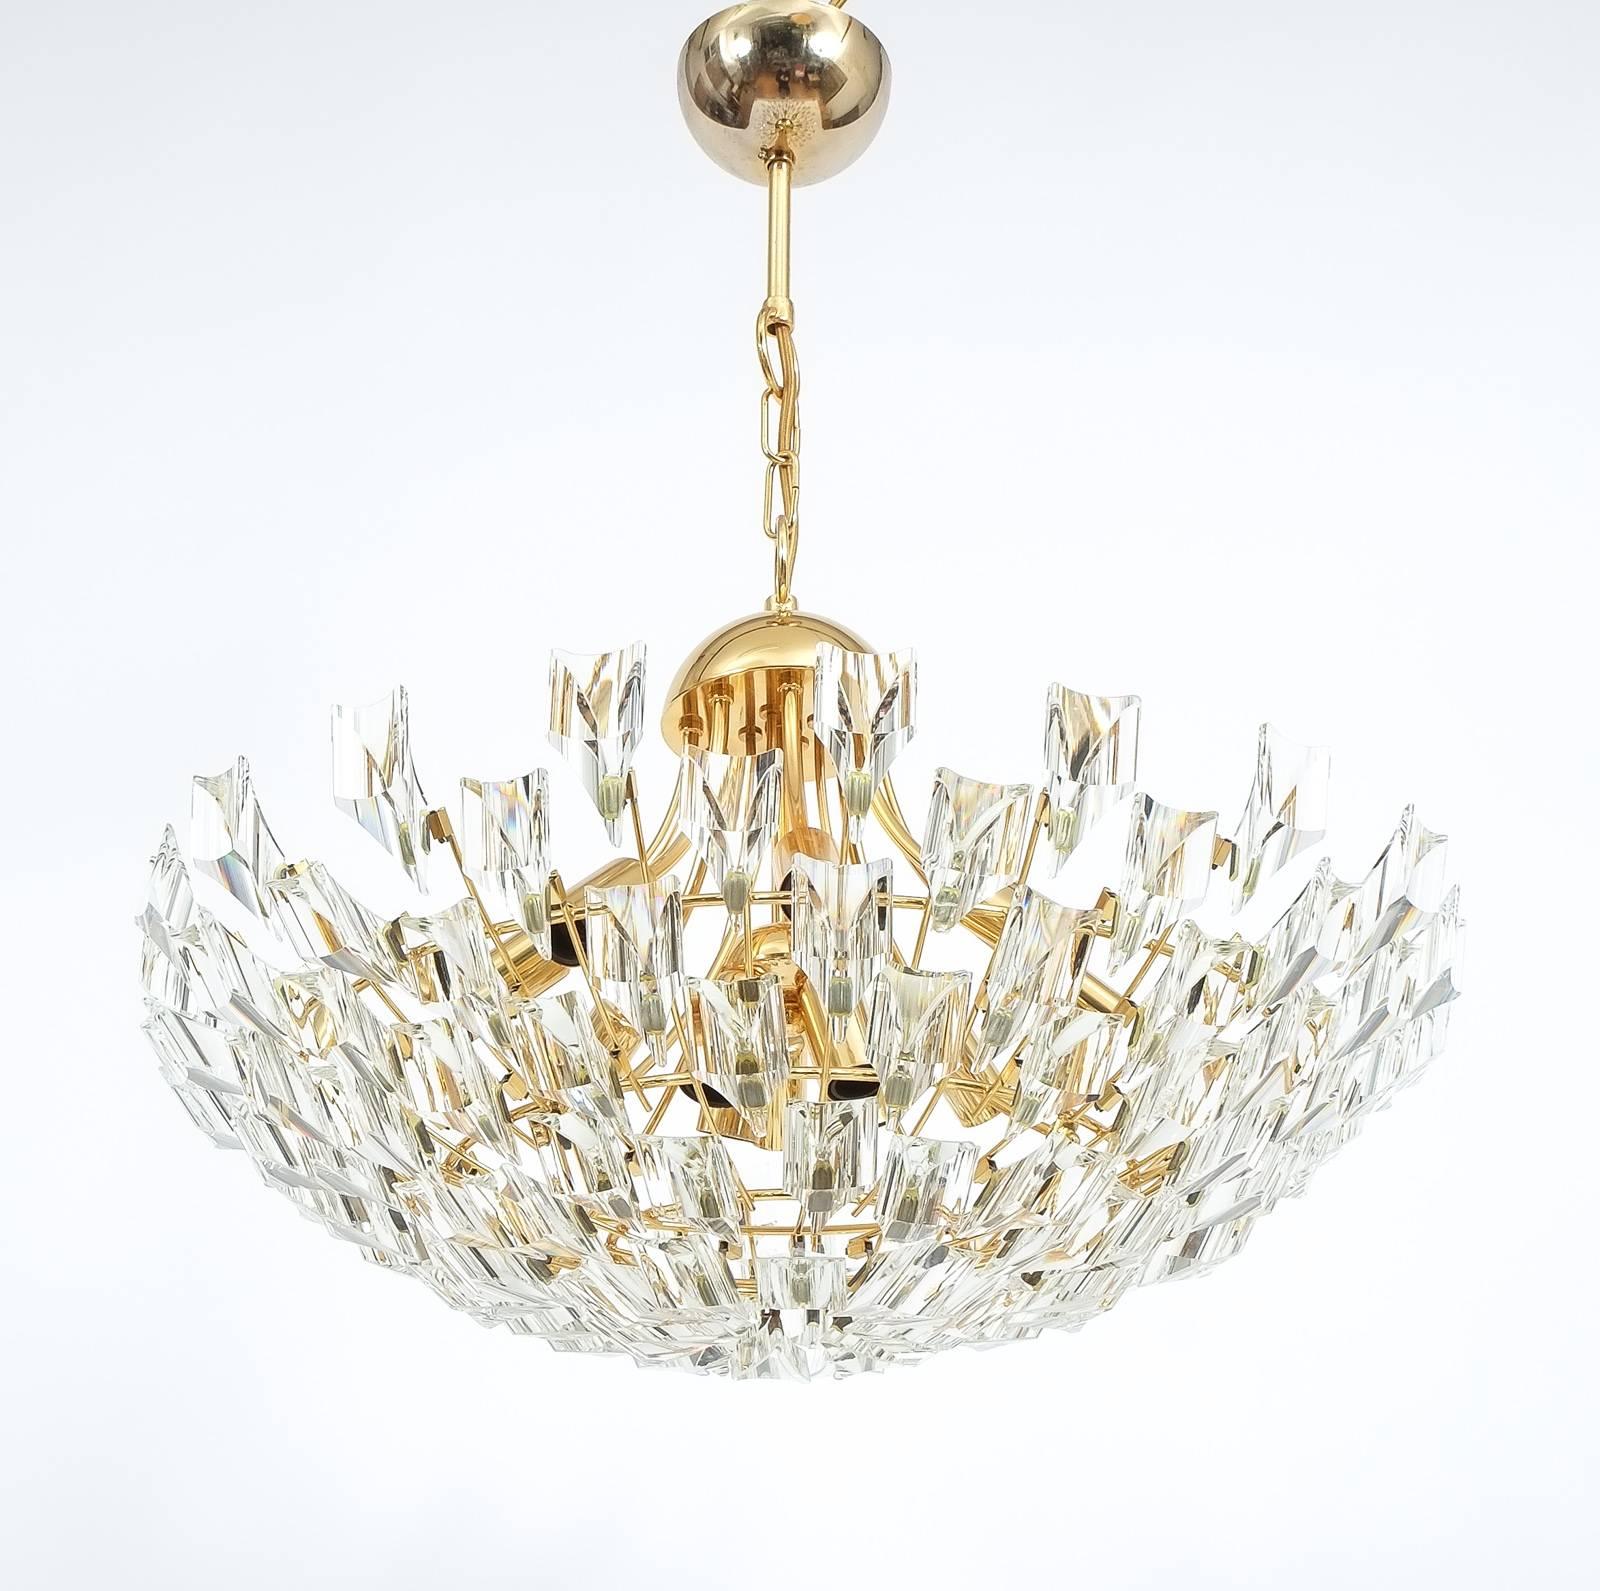 Large glass and brass chandelier by Stilkrone, circa 1970 with gold-plated brass hardware and a multitude of crystals. 12 bulbs (40w each) are illuminating this piece. The condition is excellent.